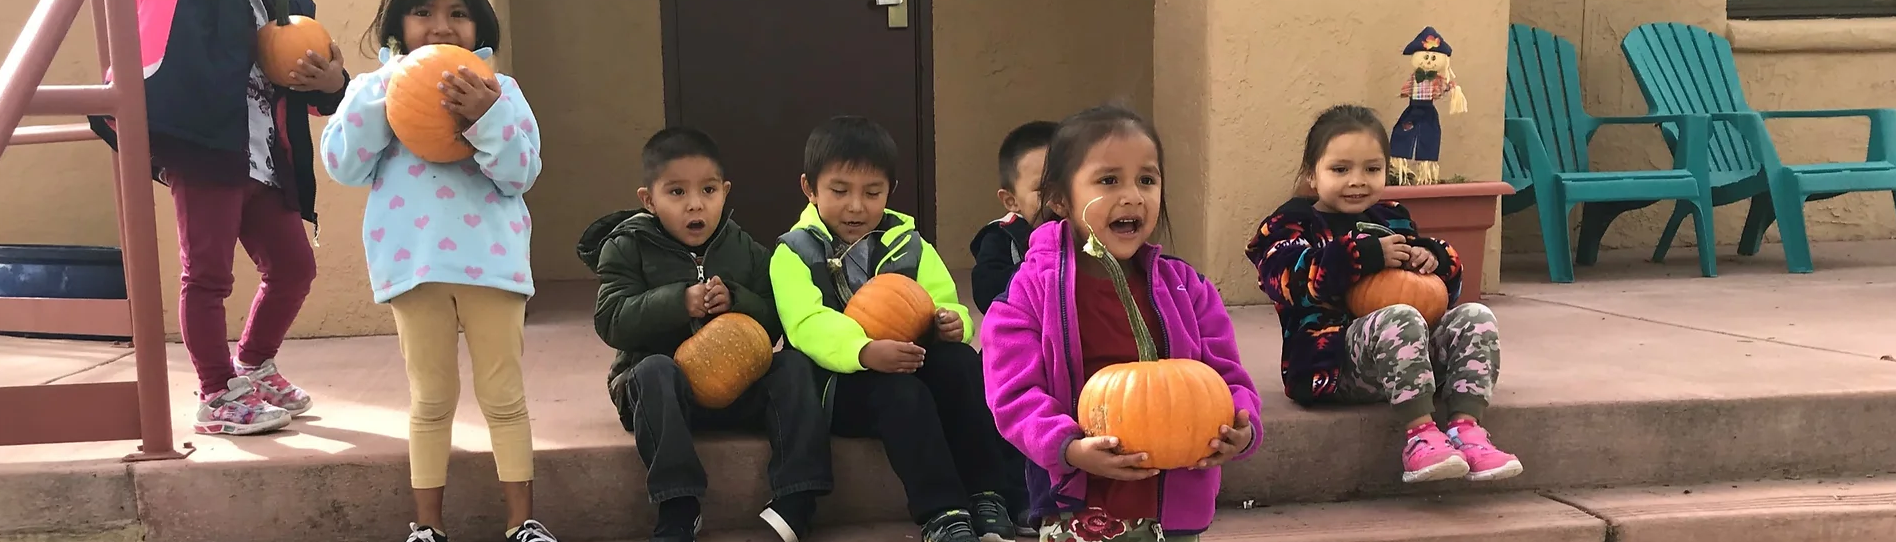 young students with pumpkins